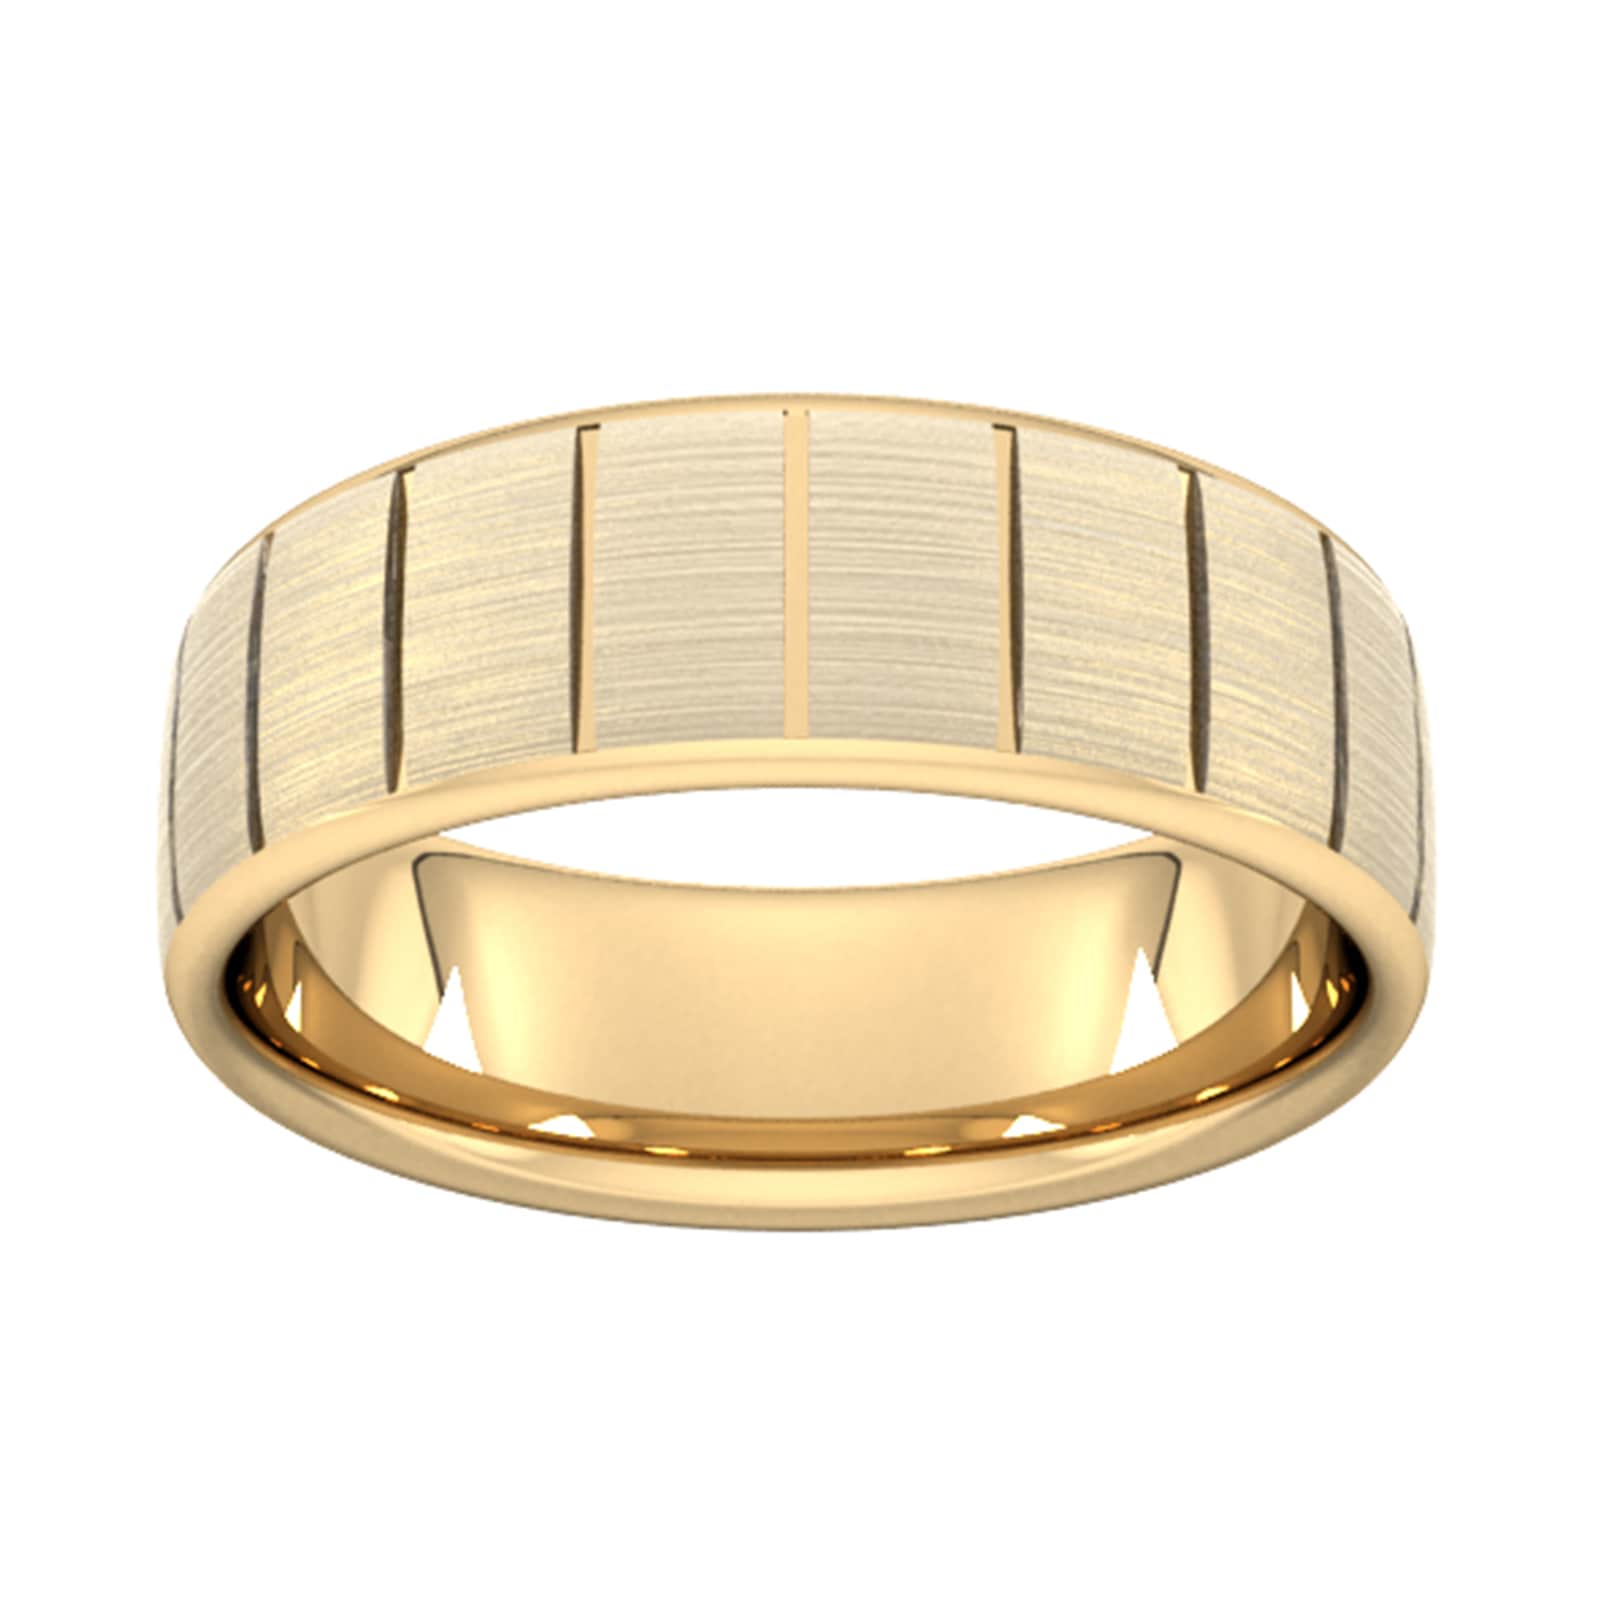 7mm Traditional Court Standard Vertical Lines Wedding Ring In 18 Carat Yellow Gold - Ring Size K